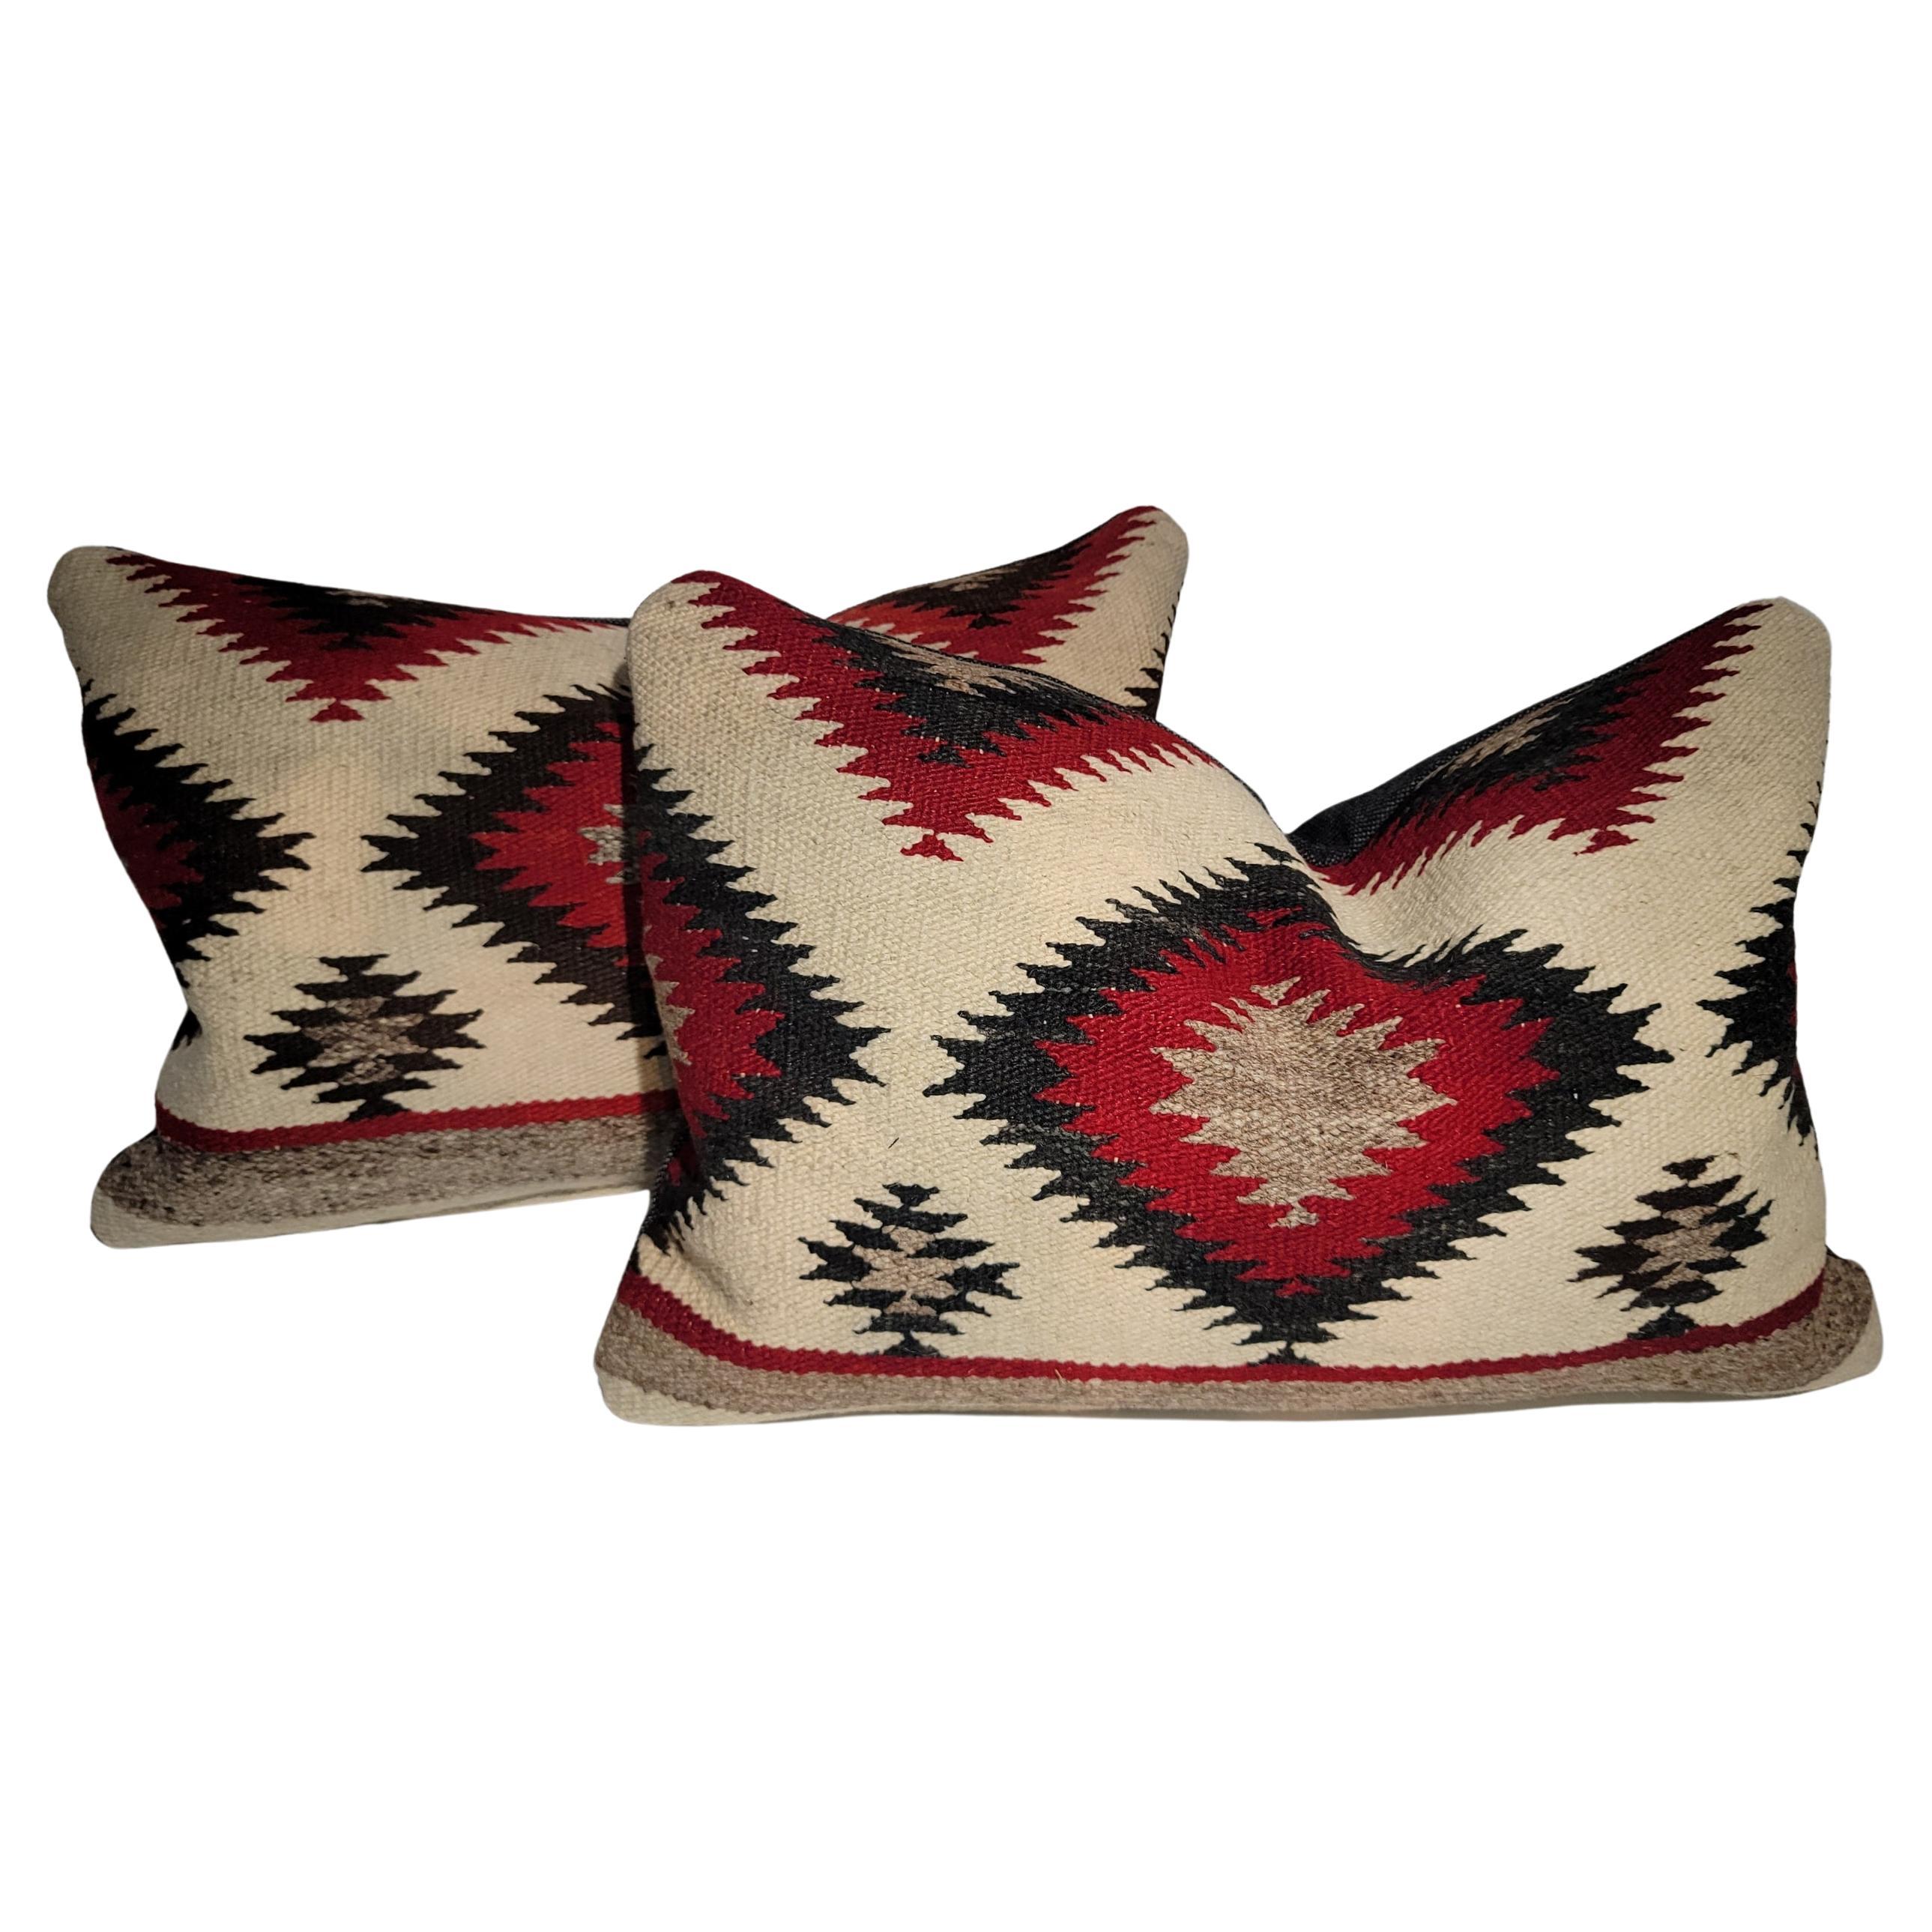 Navajo Indian Weaving Pillows -Pair For Sale